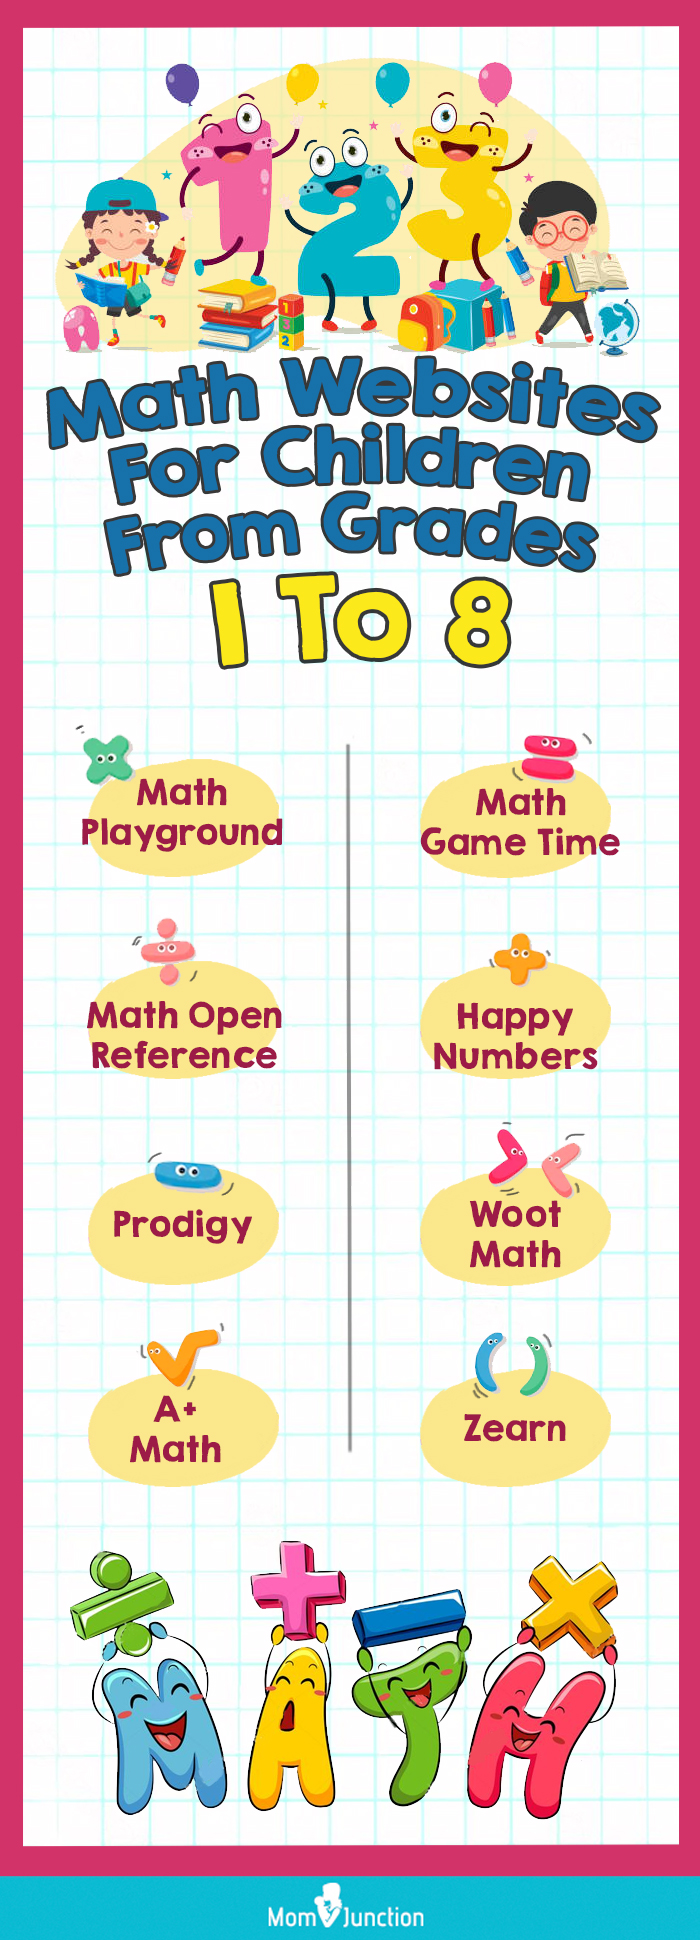 make math learning easy for help your child (infographic)